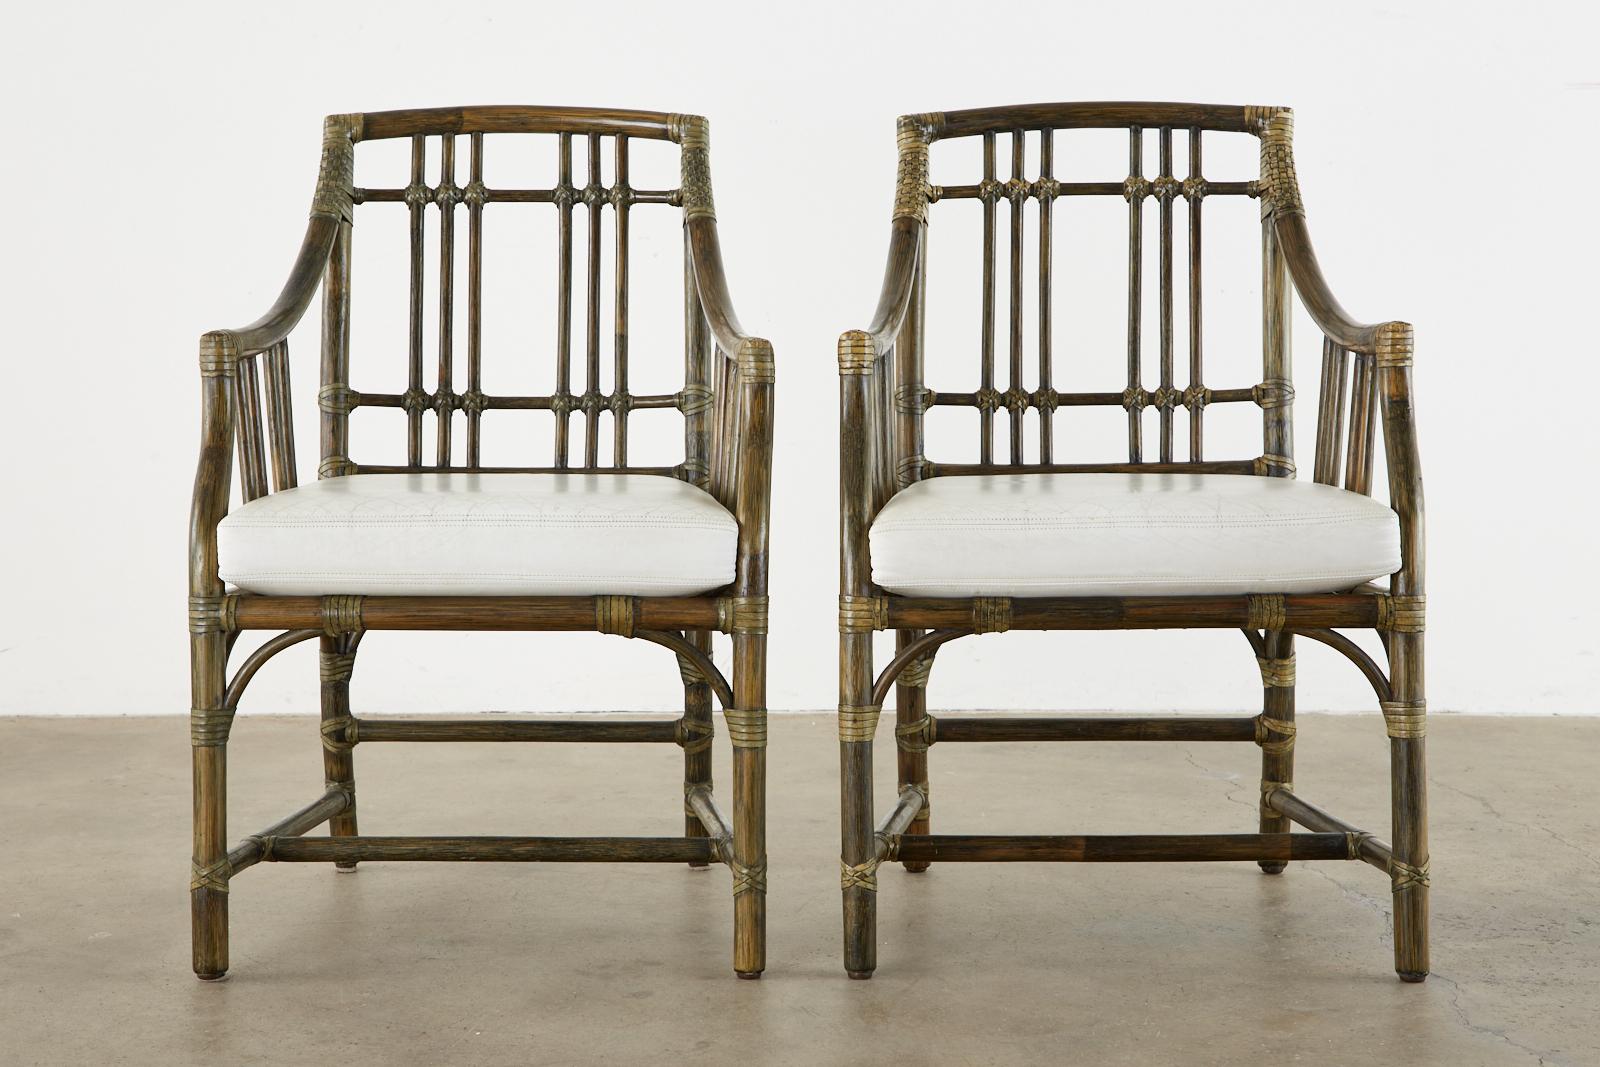 Bespoke pair of McGuire balboa armchairs featuring a custom subtle moss green finish. Beautifully crafted bamboo rattan poles with gracefully curved arms and supports. The backs have a decorative open fretwork grid pattern and the generous seat is